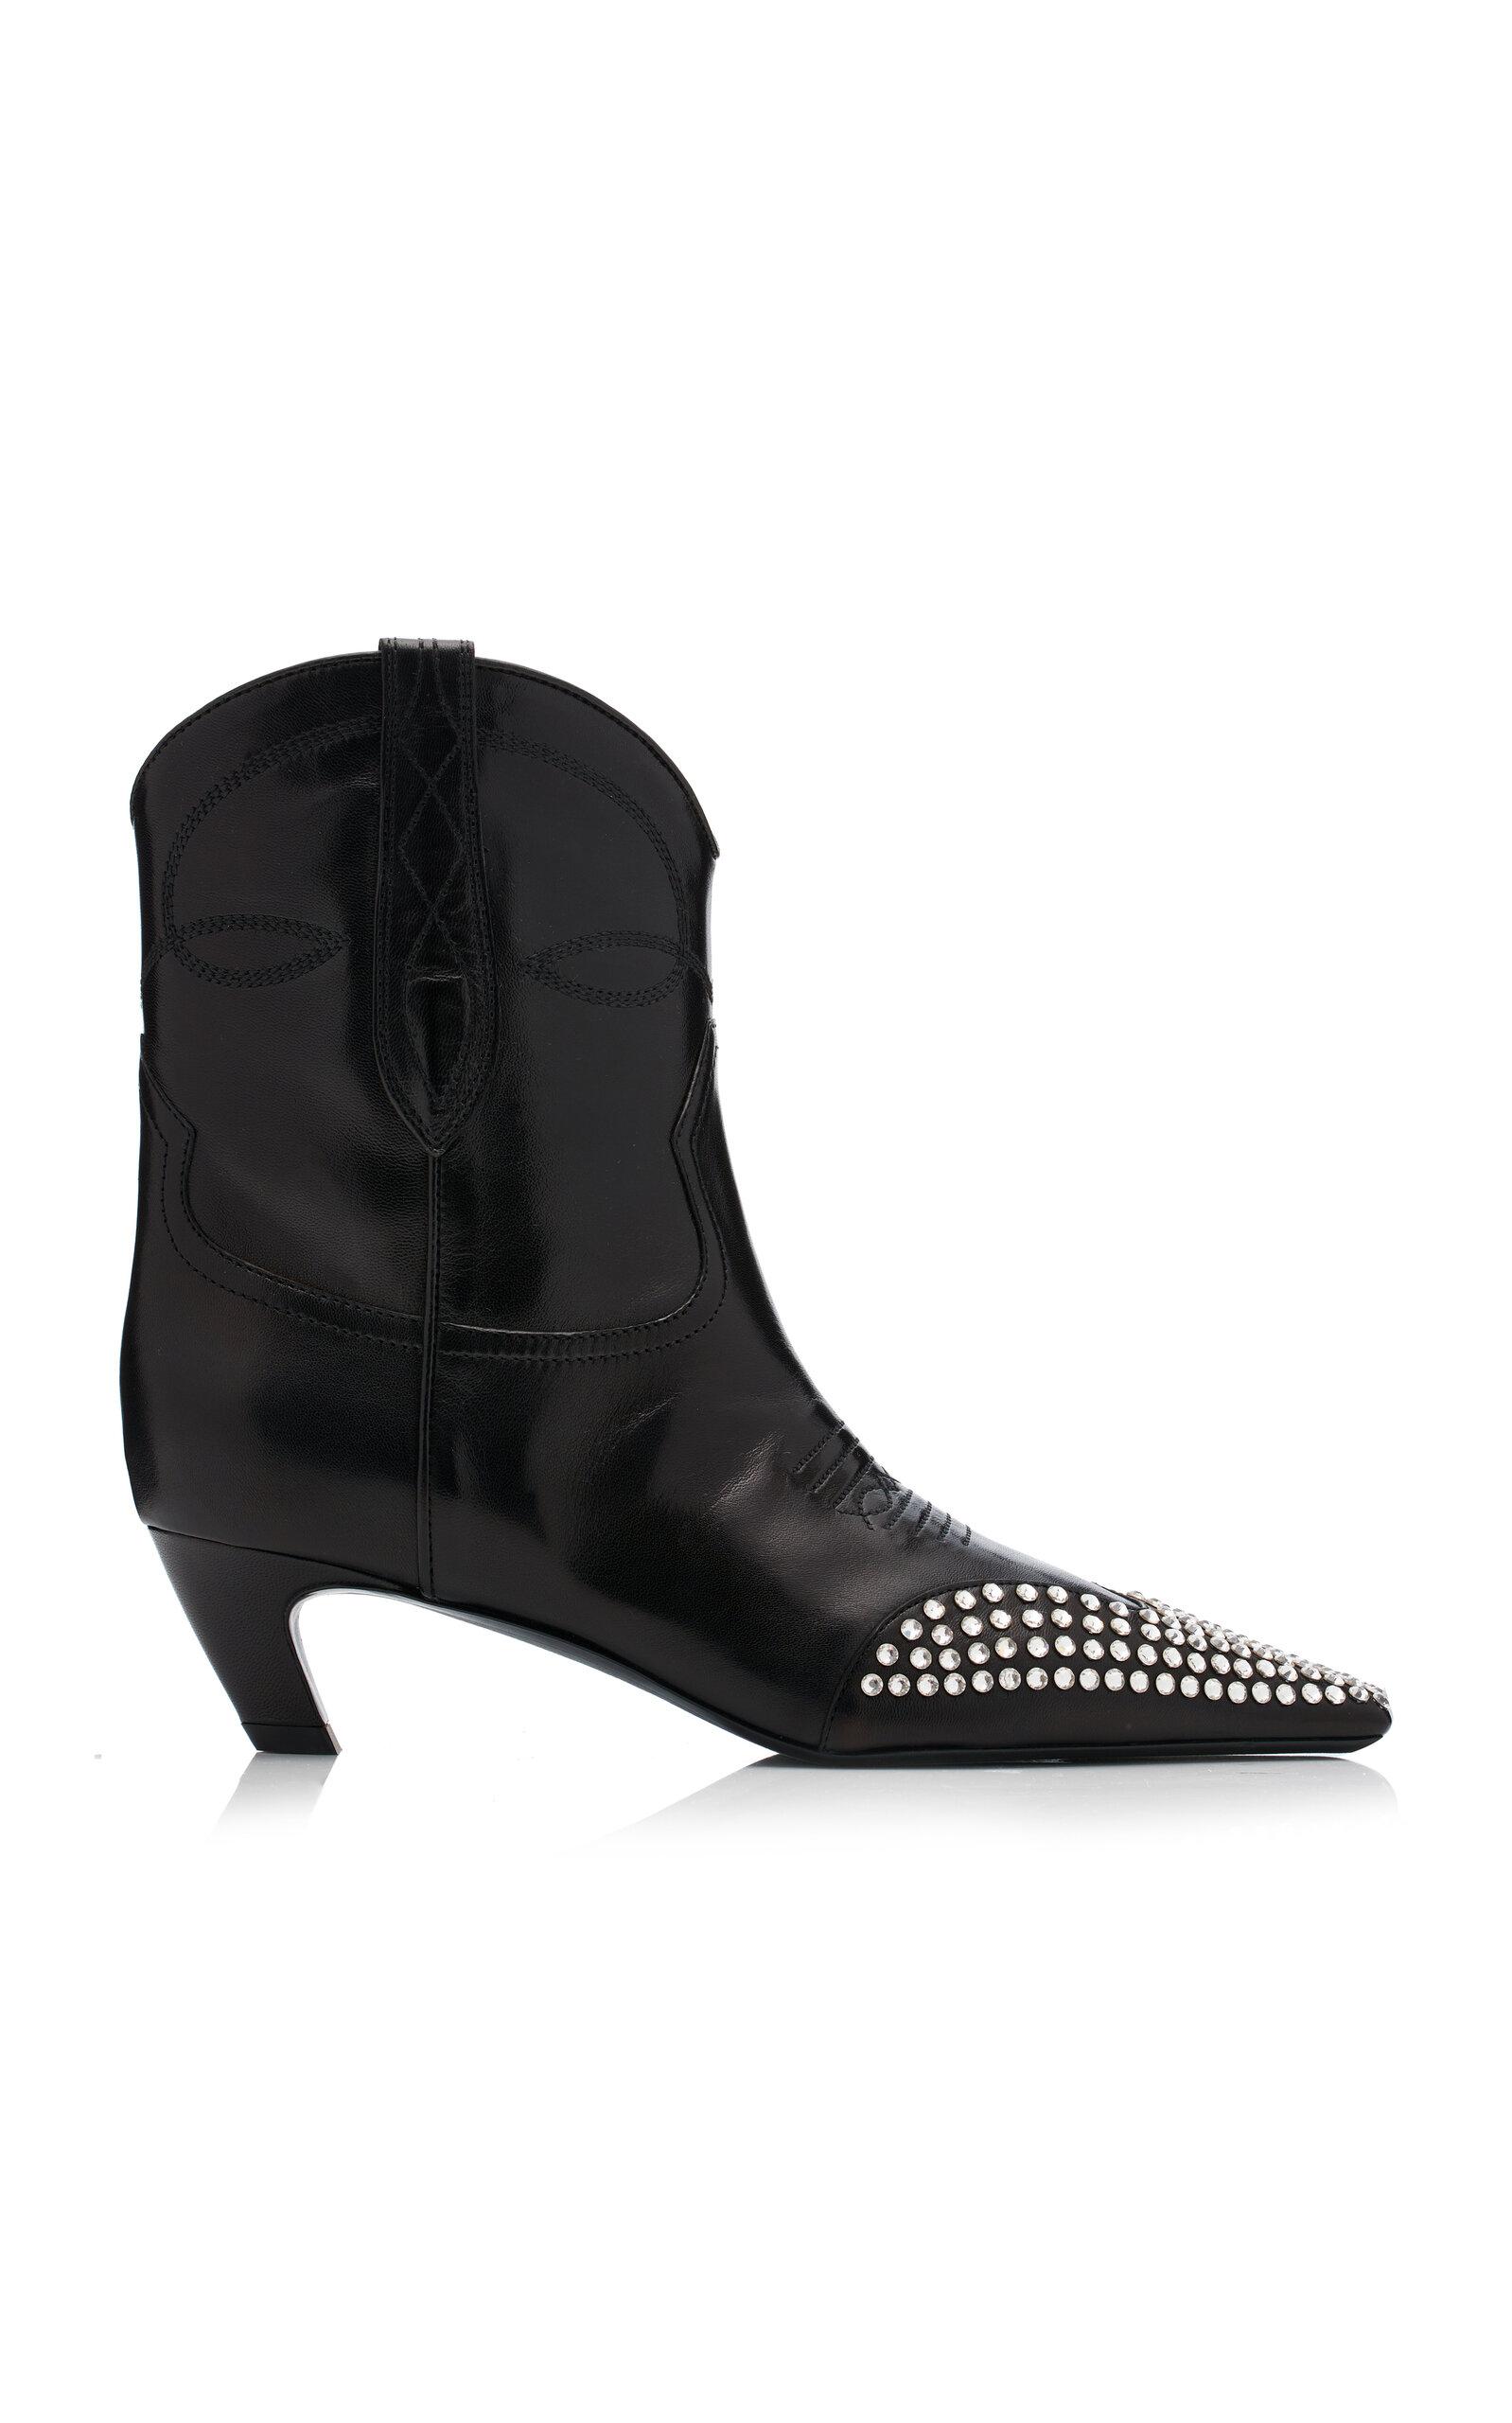 Khaite Dallas Crystal-embellished Leather Ankle Boots in Black | Lyst